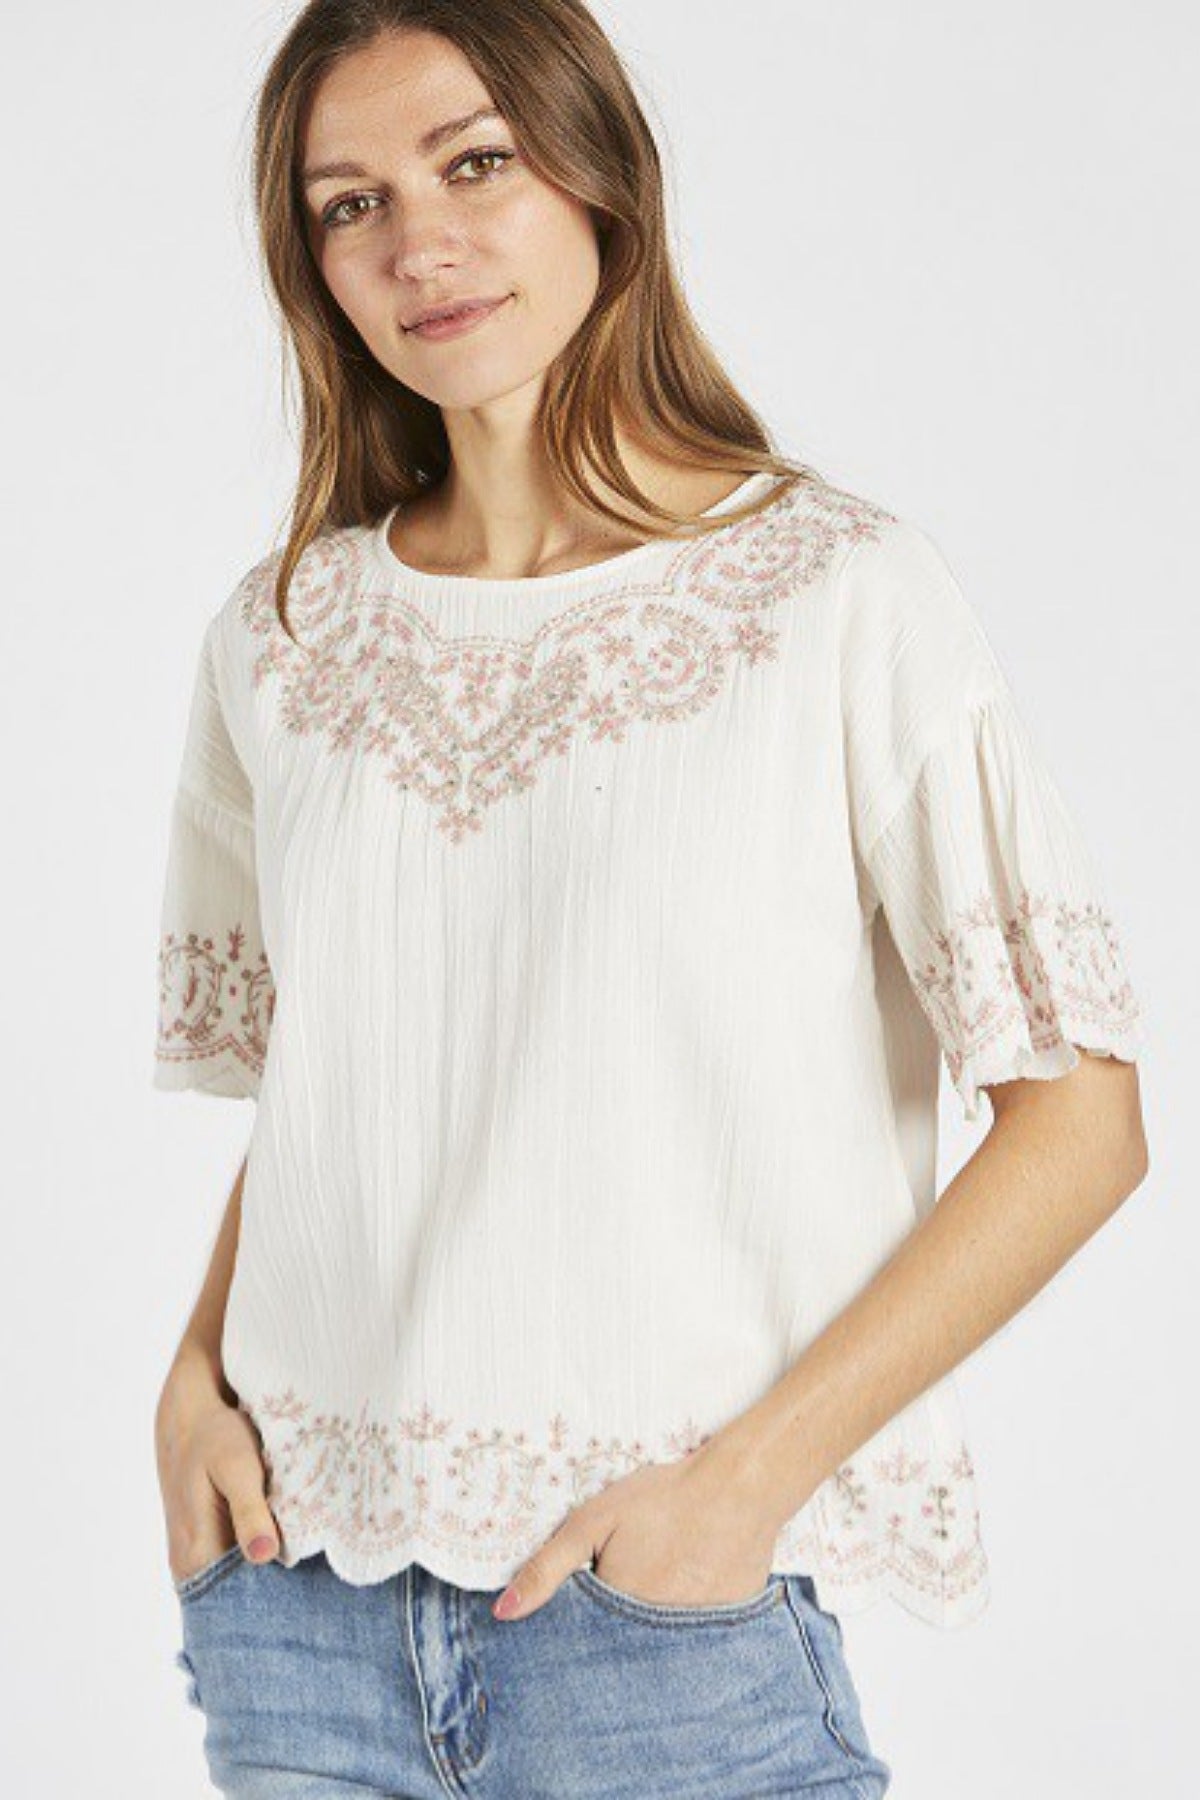 Adaline Embroidered Top in Ivory